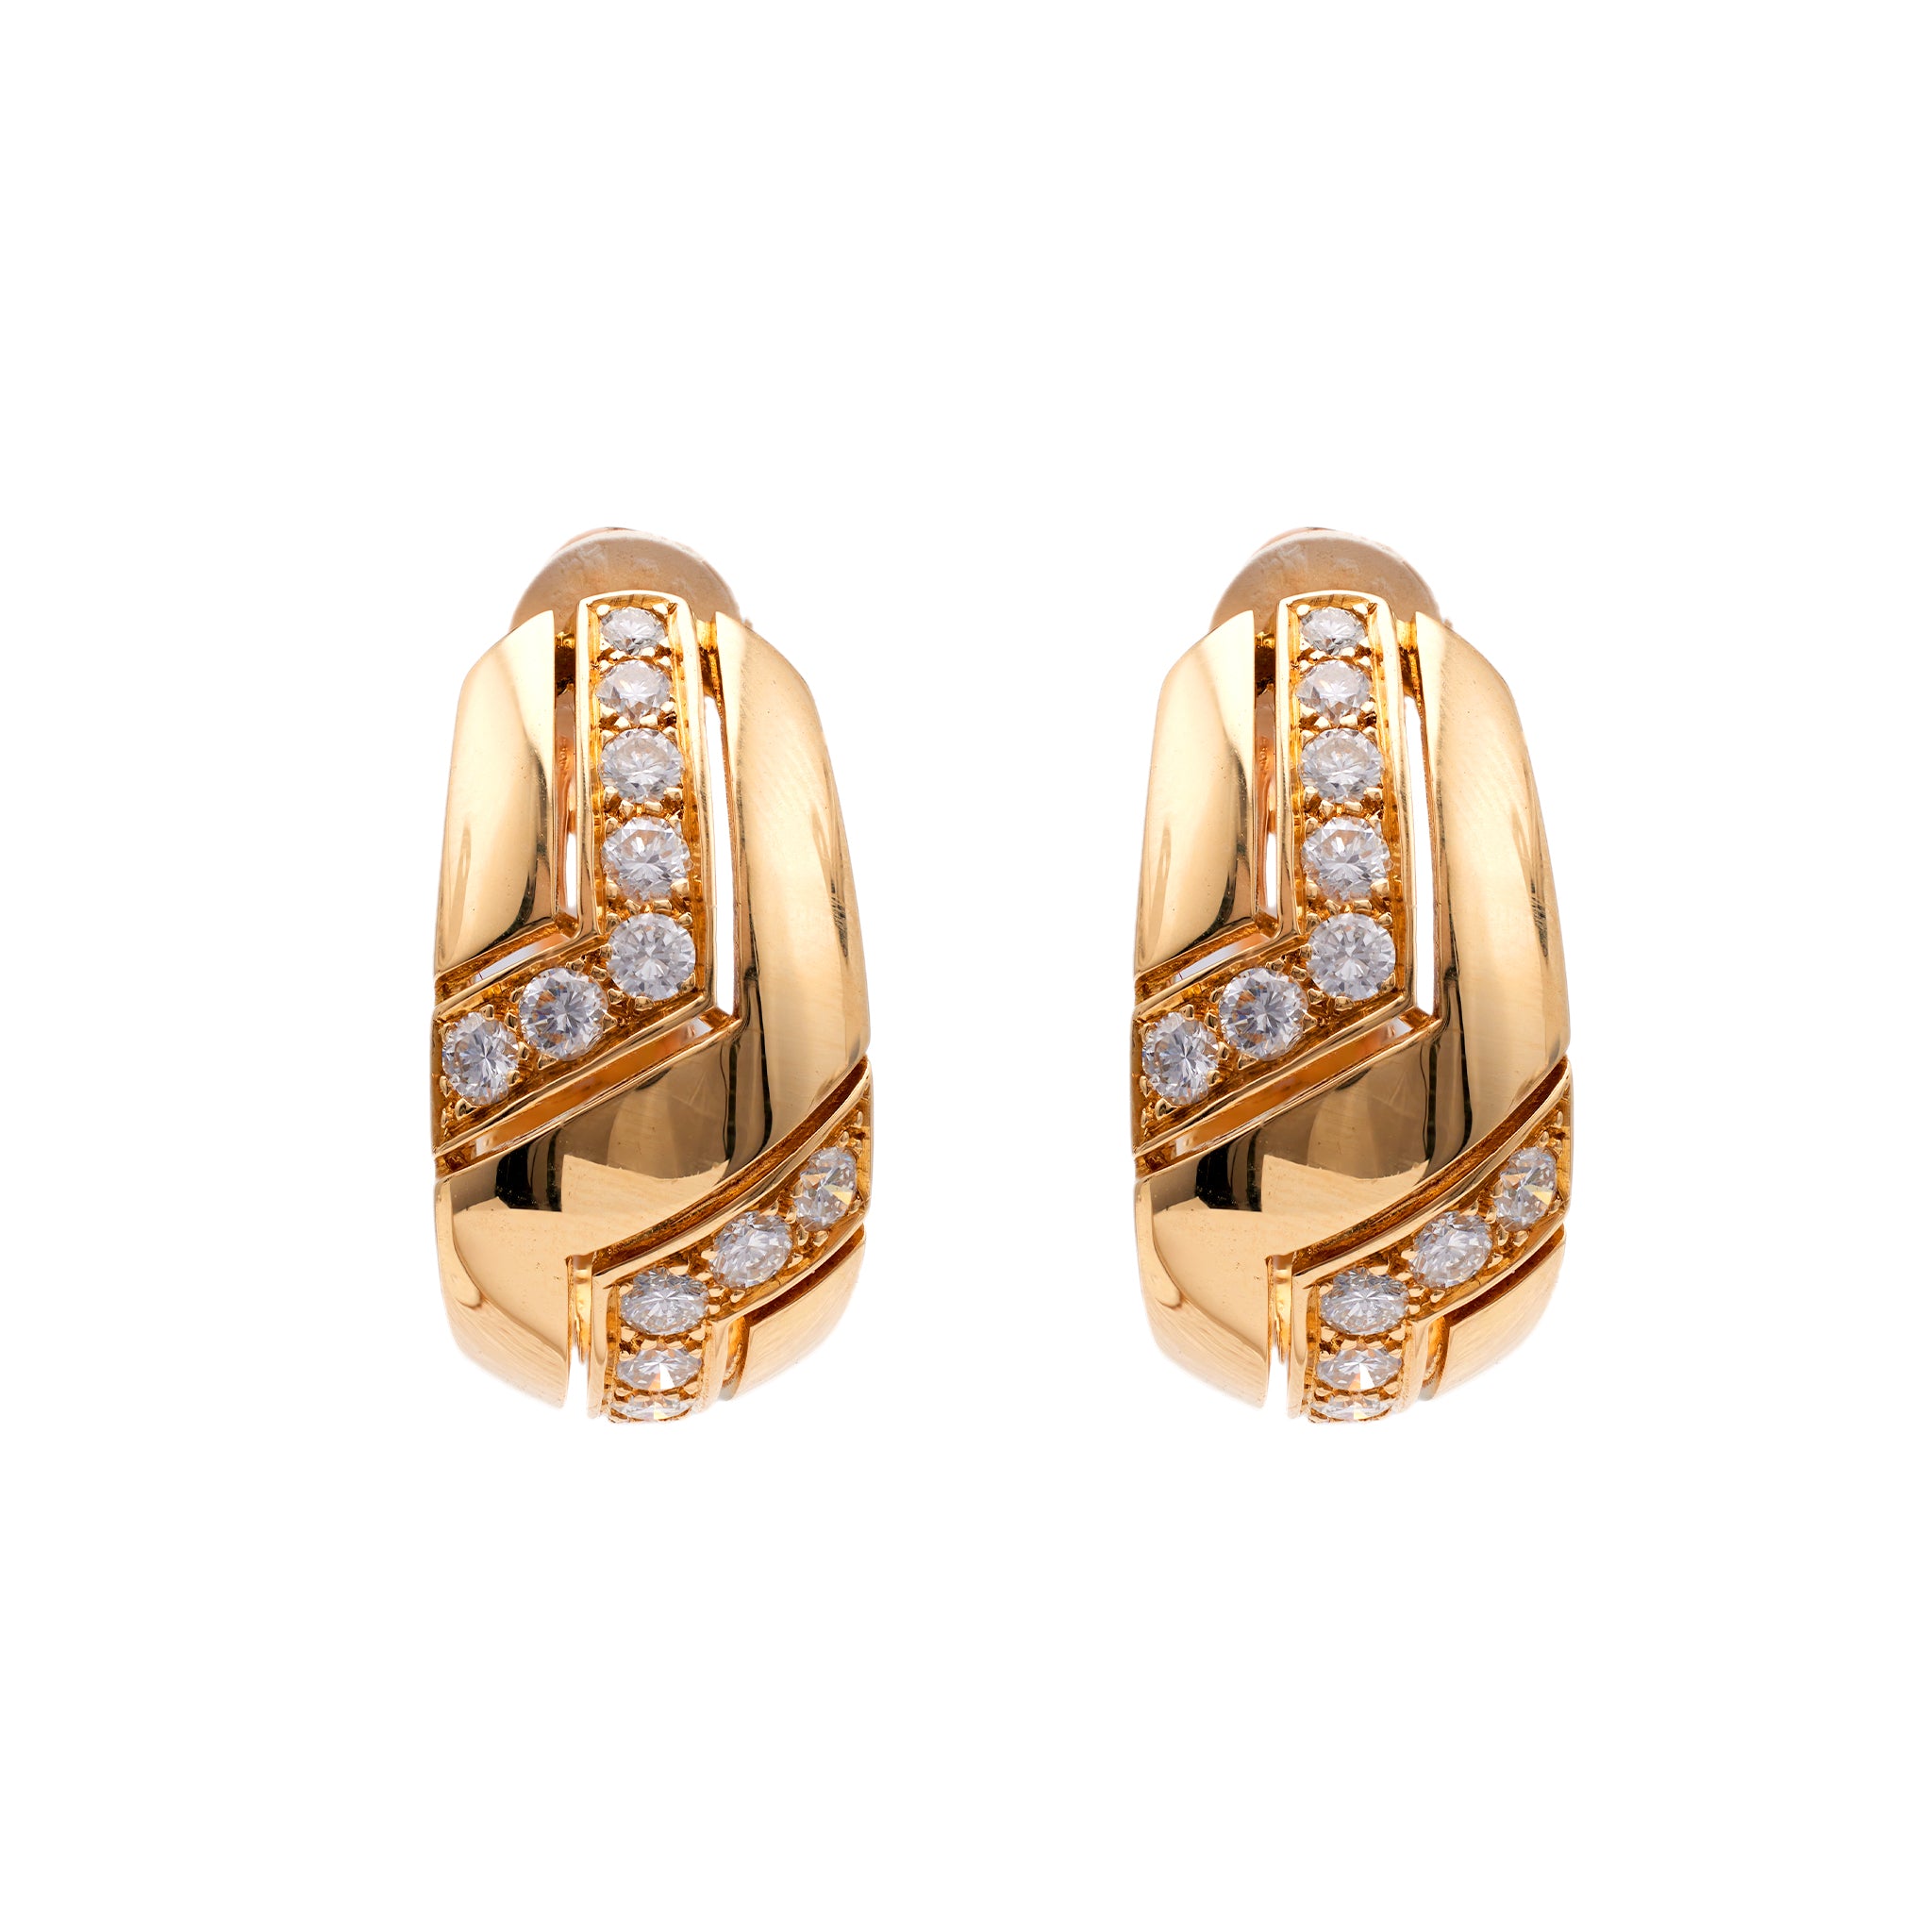 Pair of Vintage Cartier French Diamond 18k Yellow Gold Clip On Earrings Earrings Jack Weir & Sons   